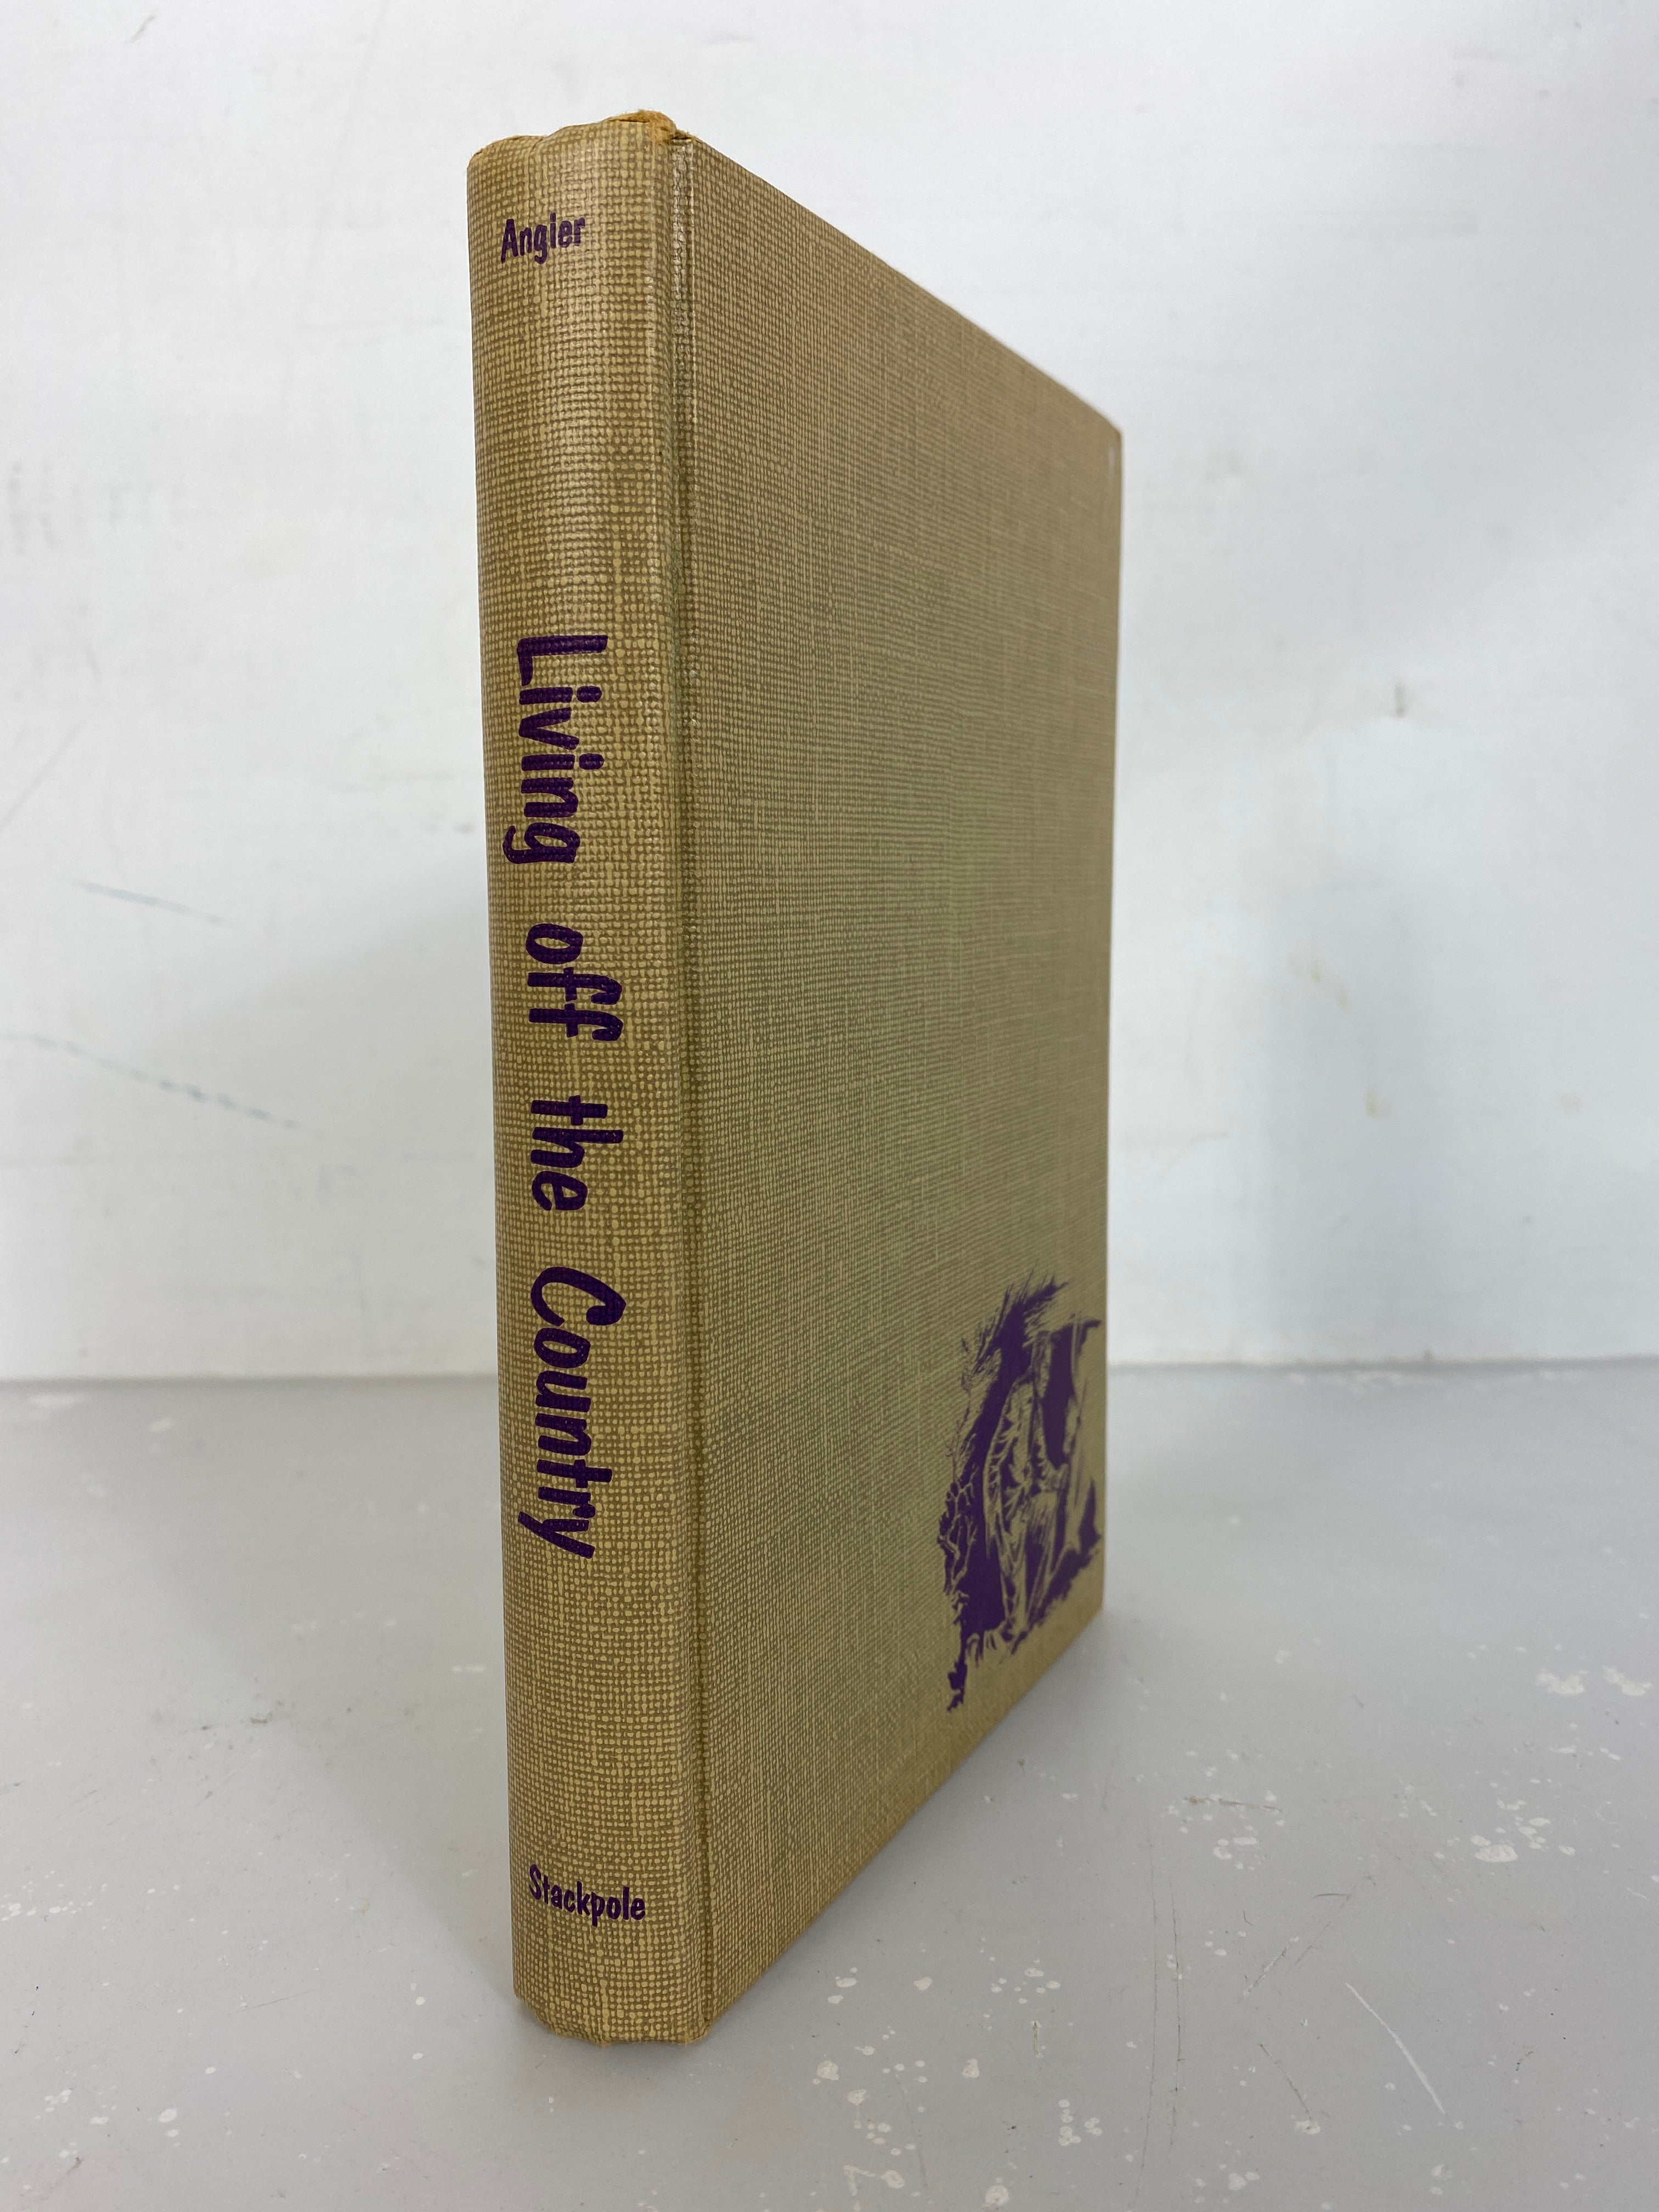 Living off the Country How to Stay Alive in the Woods by Bradford Angier 1959 HC